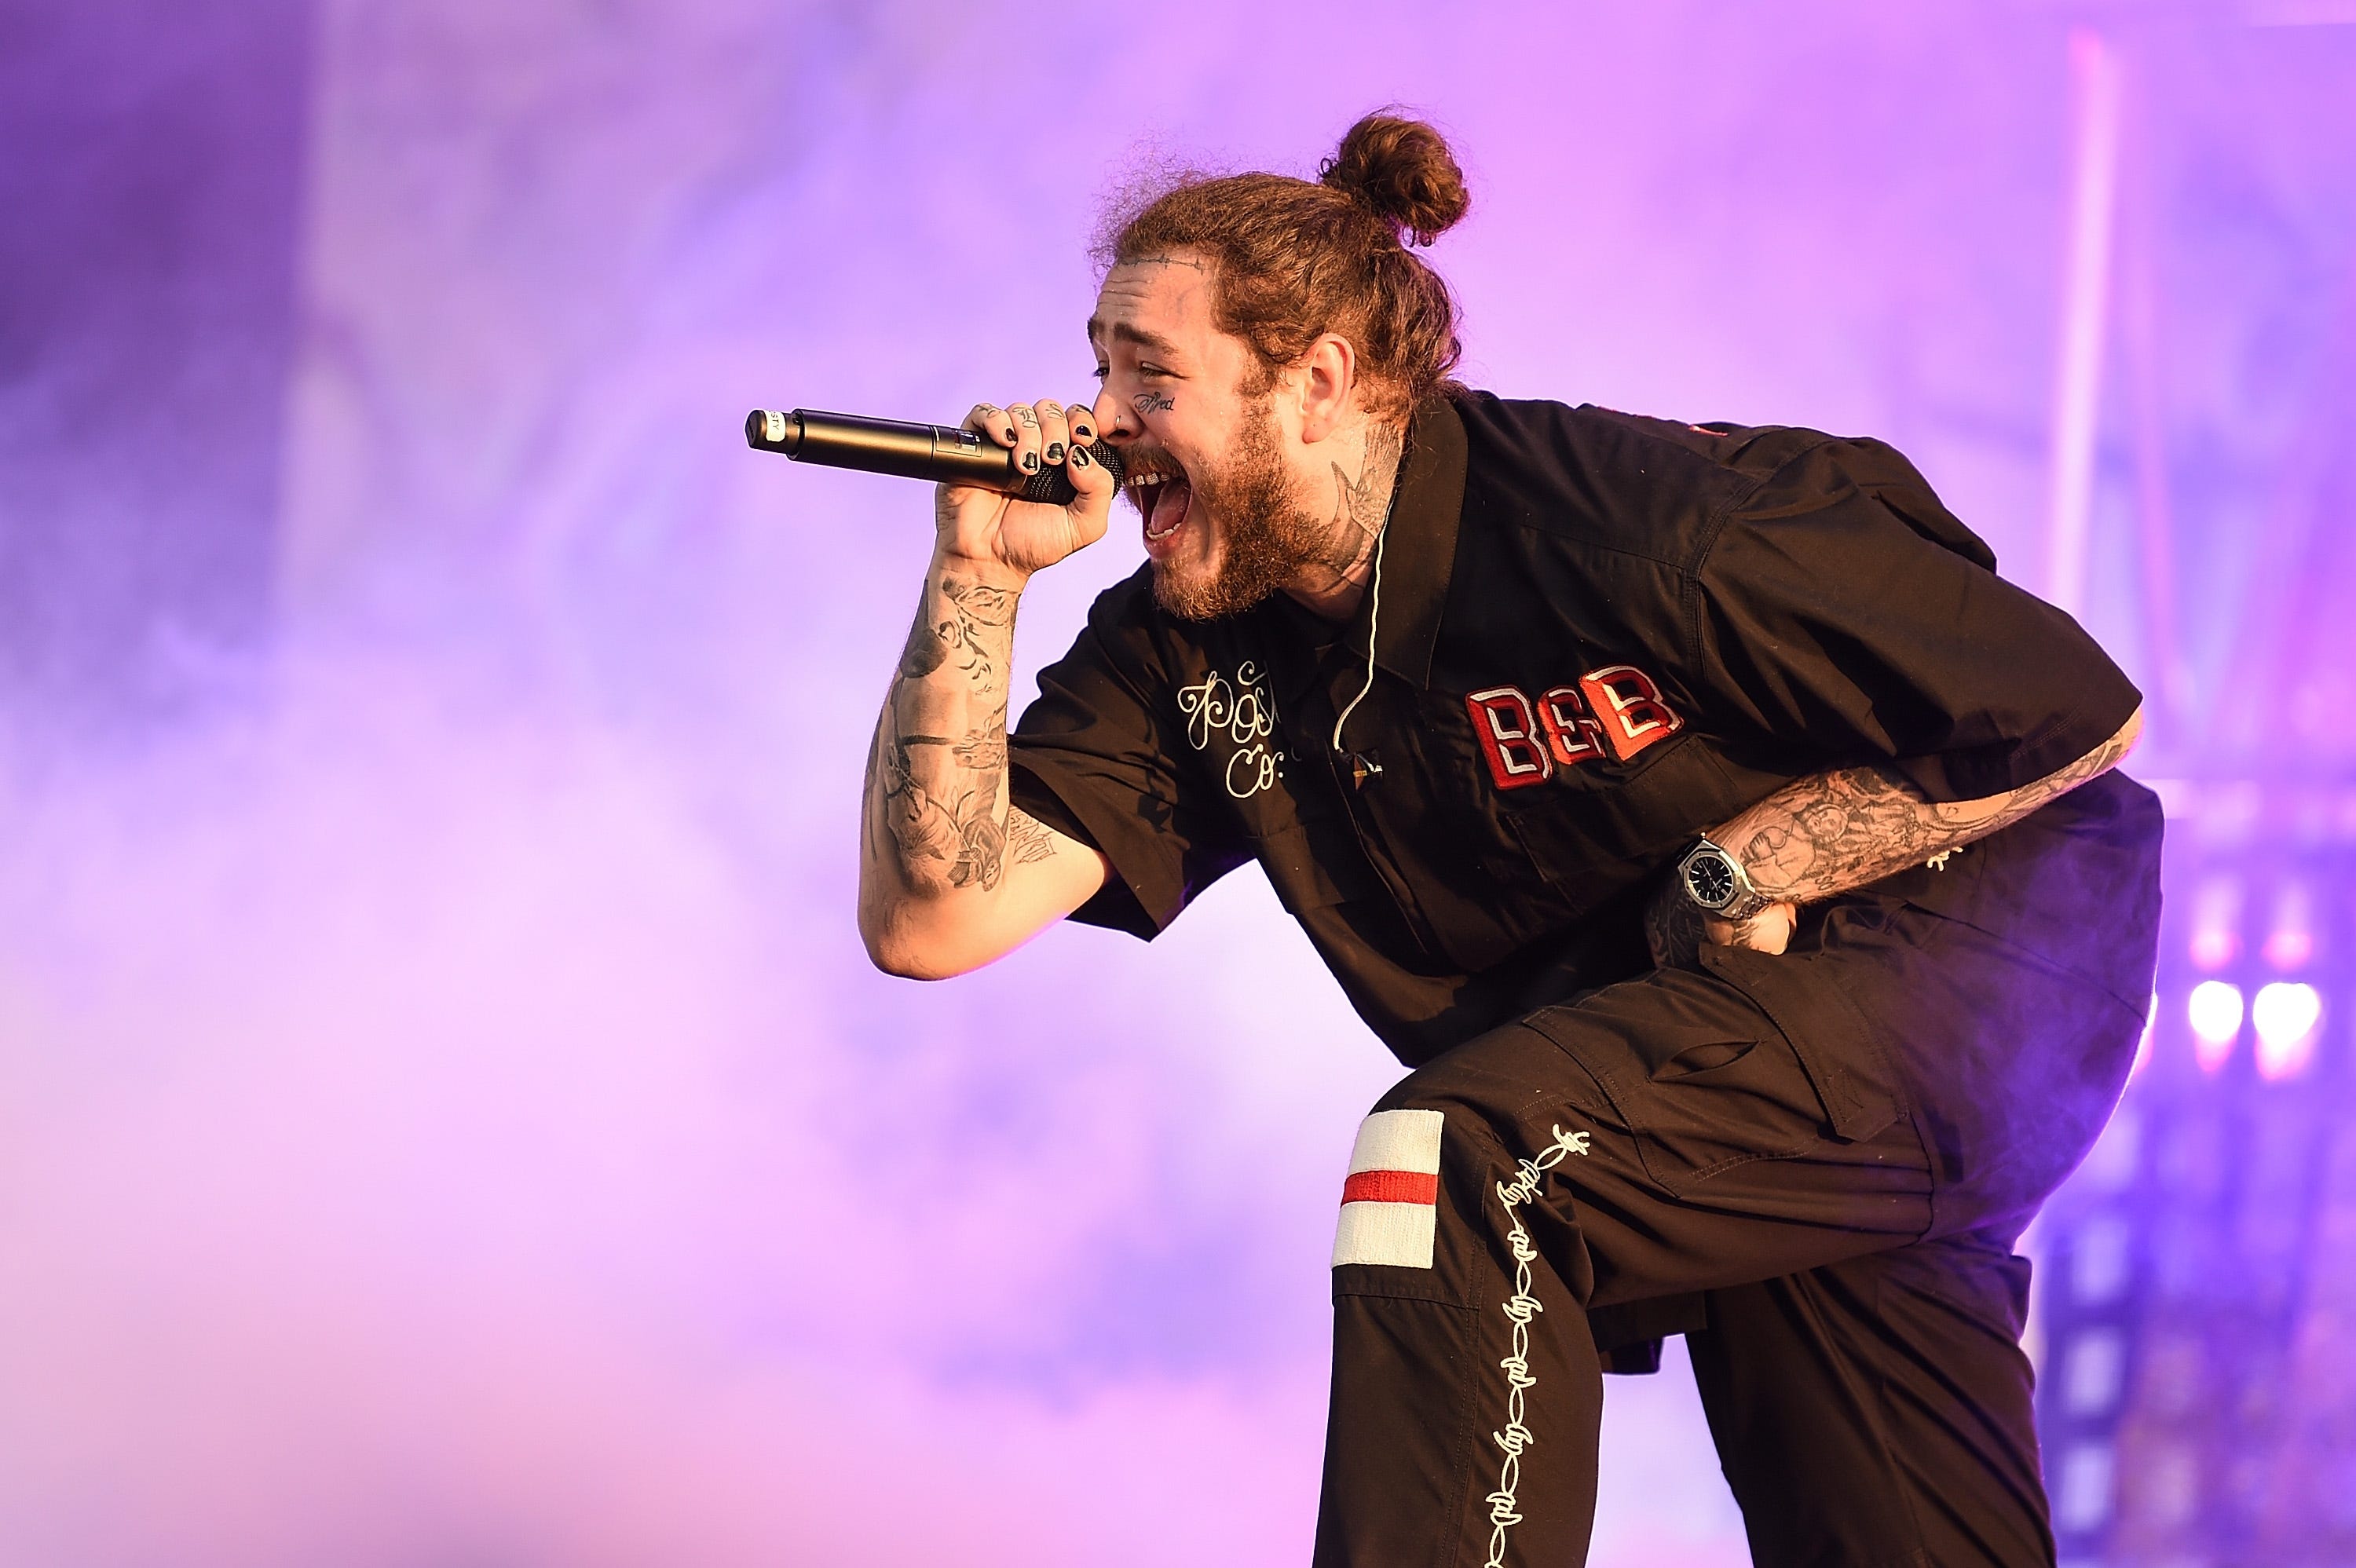 Post Malone greets fans at an Indianapolis Olive Garden